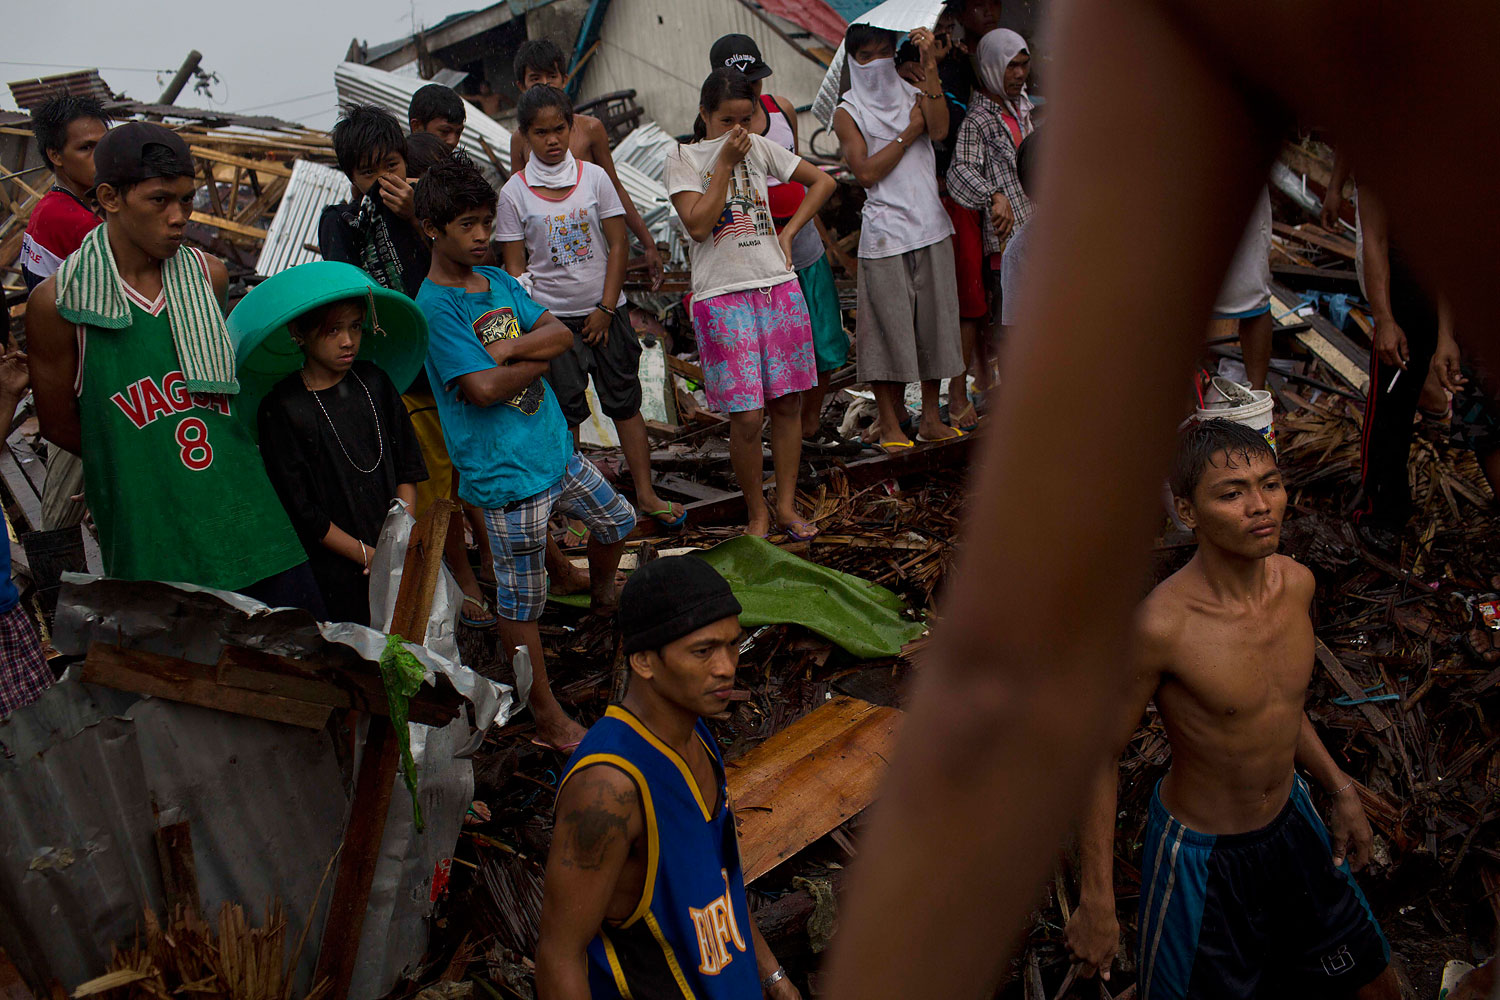 Typhoon Haiyan survivors stand in the rain and watch as people from their destroyed neighborhood search for dead bodies in the rubble in Tacloban, Philippines on November 22, 2013.